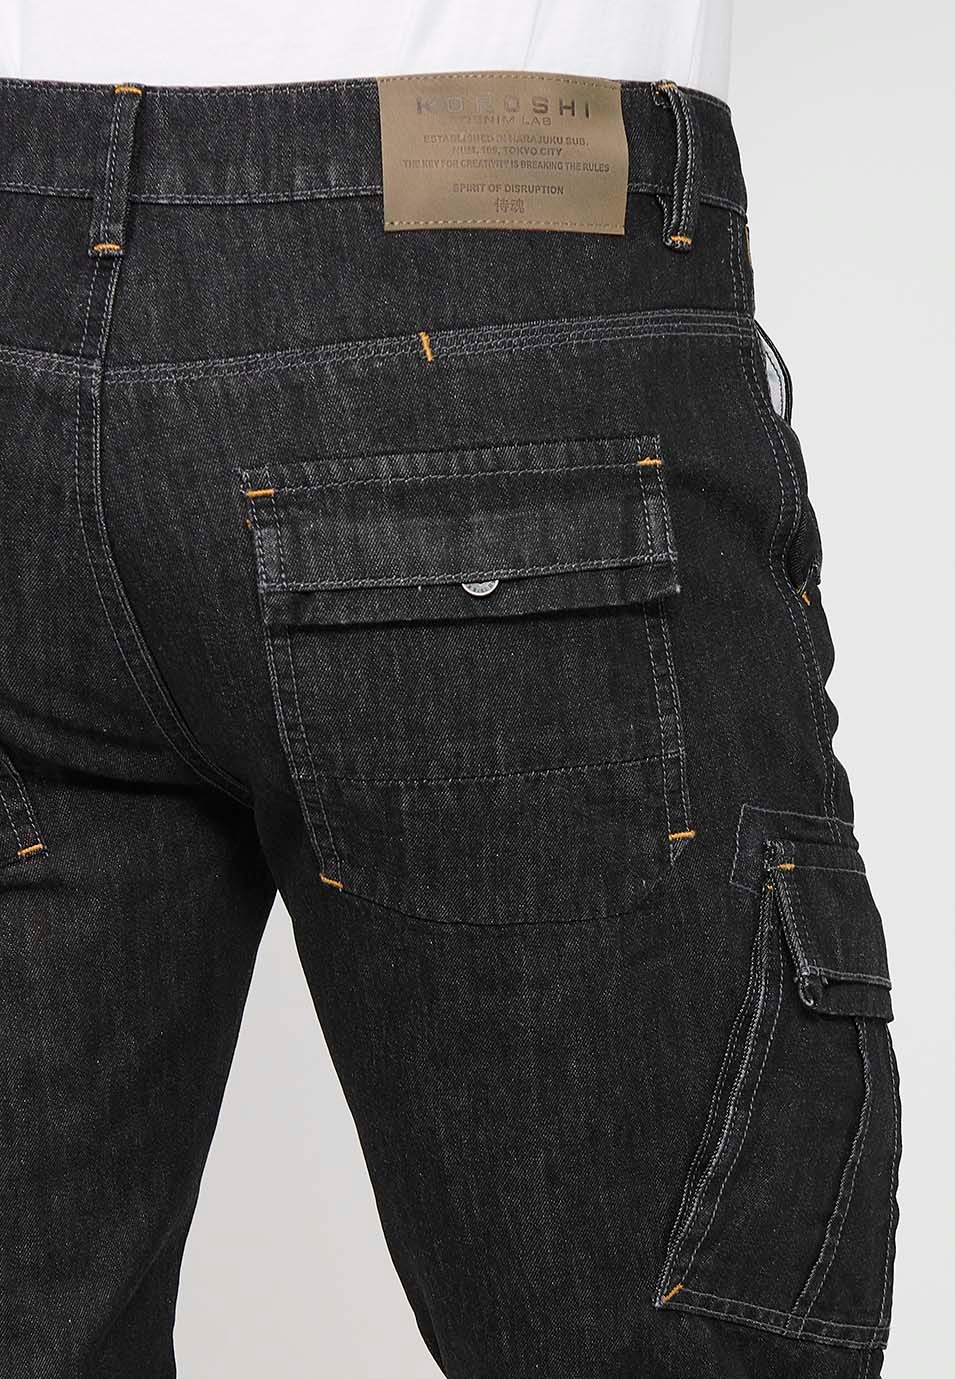 Denim Bermuda Shorts with Turn-Up Finish and Front Zipper and Button Closure with Pockets, One Ticket Pocket and Two Side Pockets in Black for Men 6